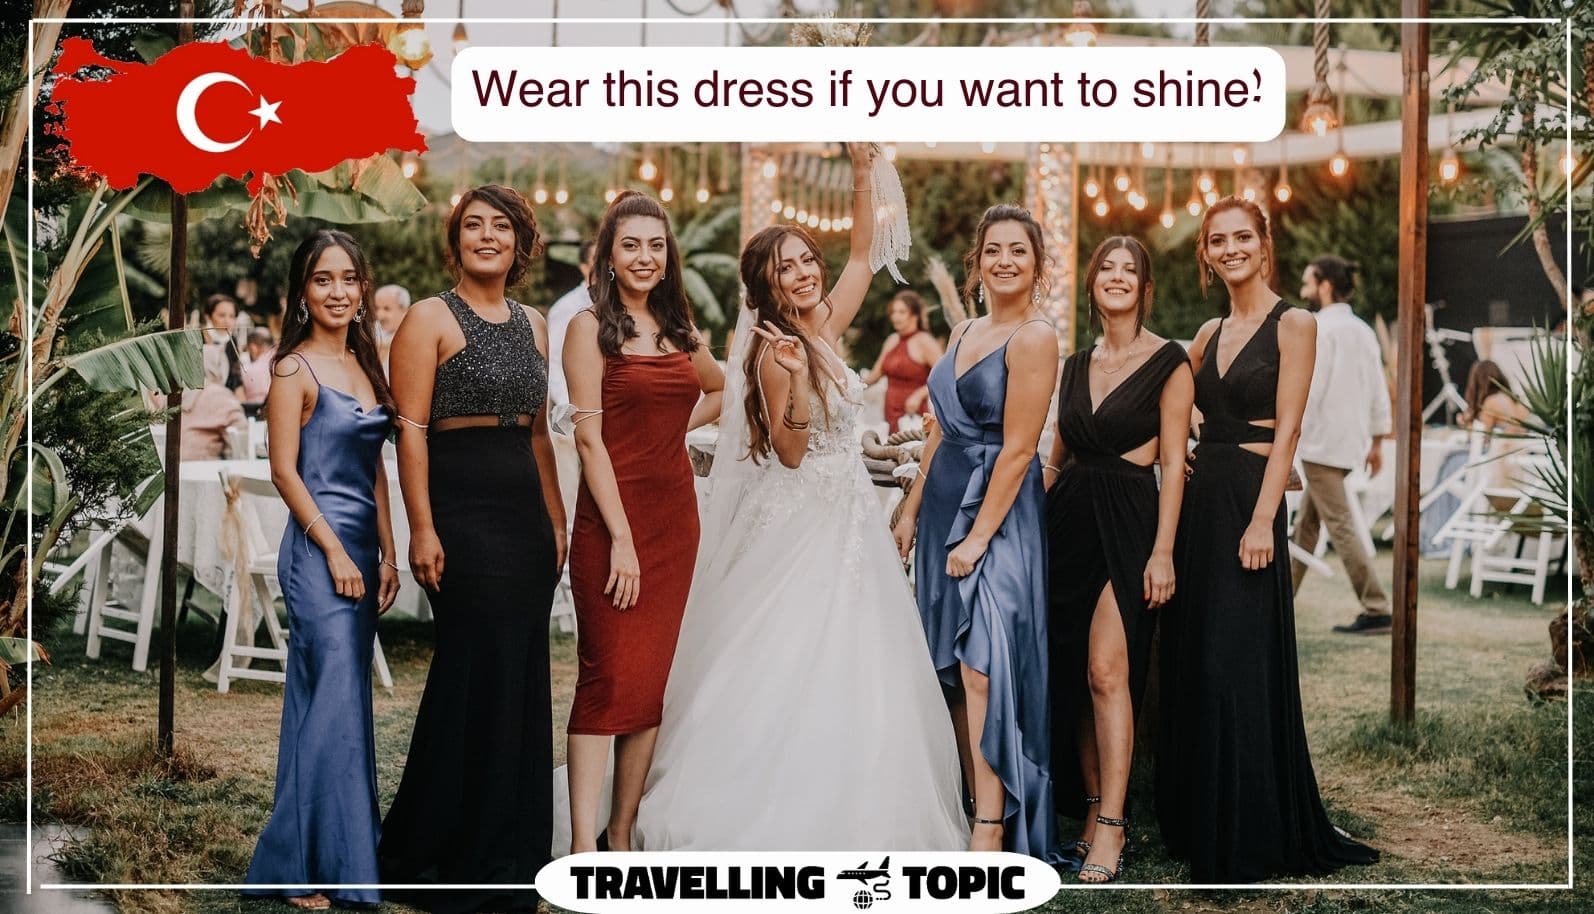 Wear this dress if you want to shine!